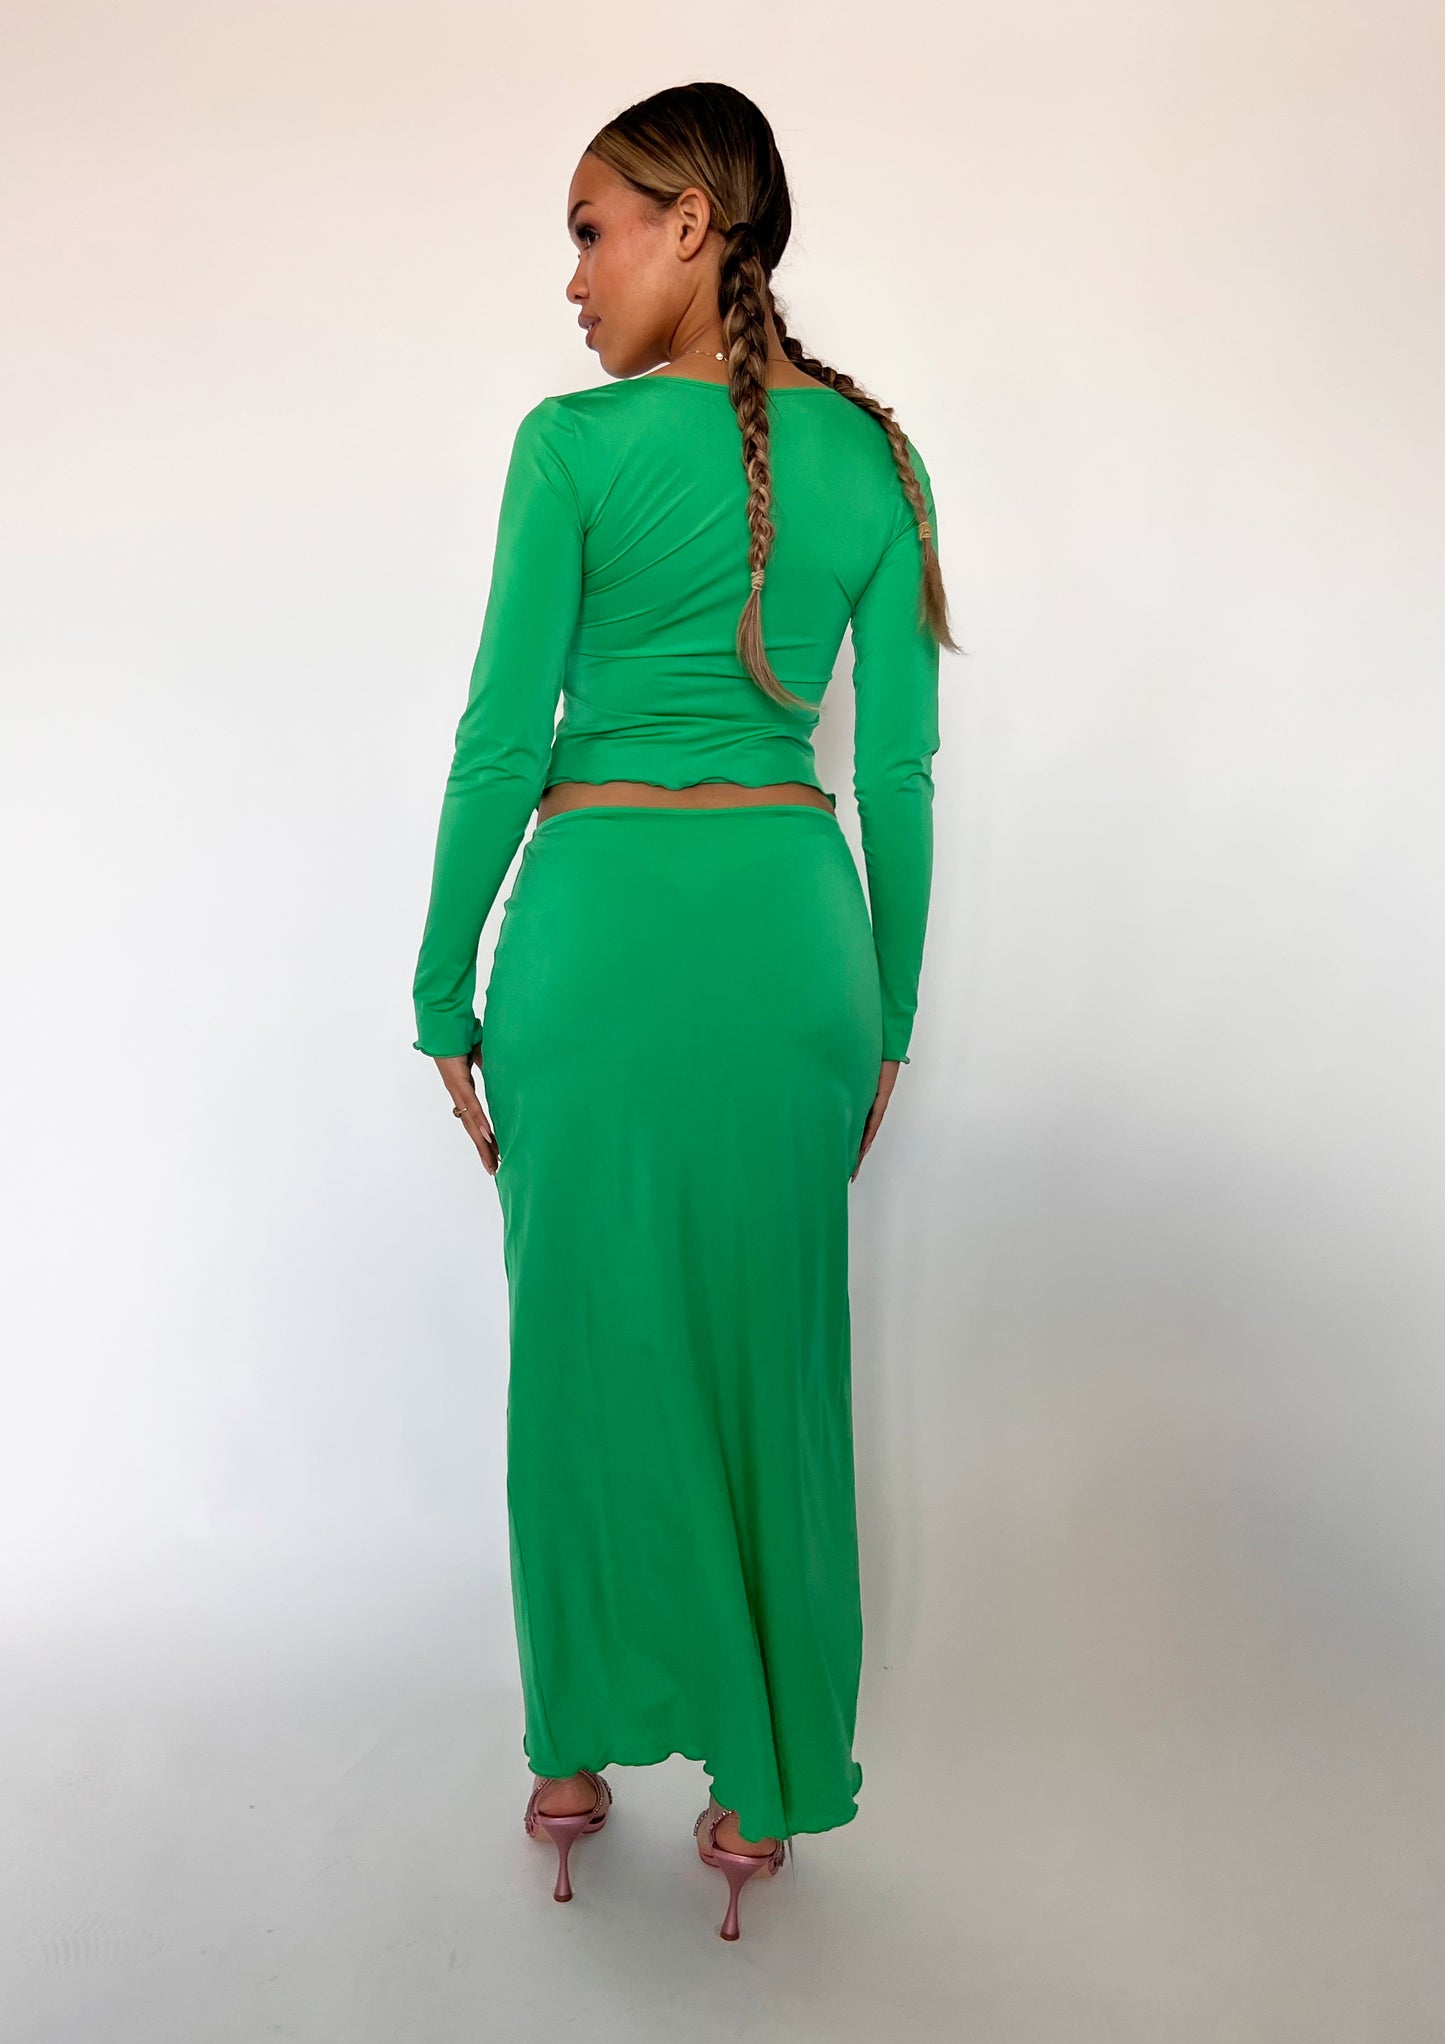 Extreme Maxi Skirt In Emerald Green Sale